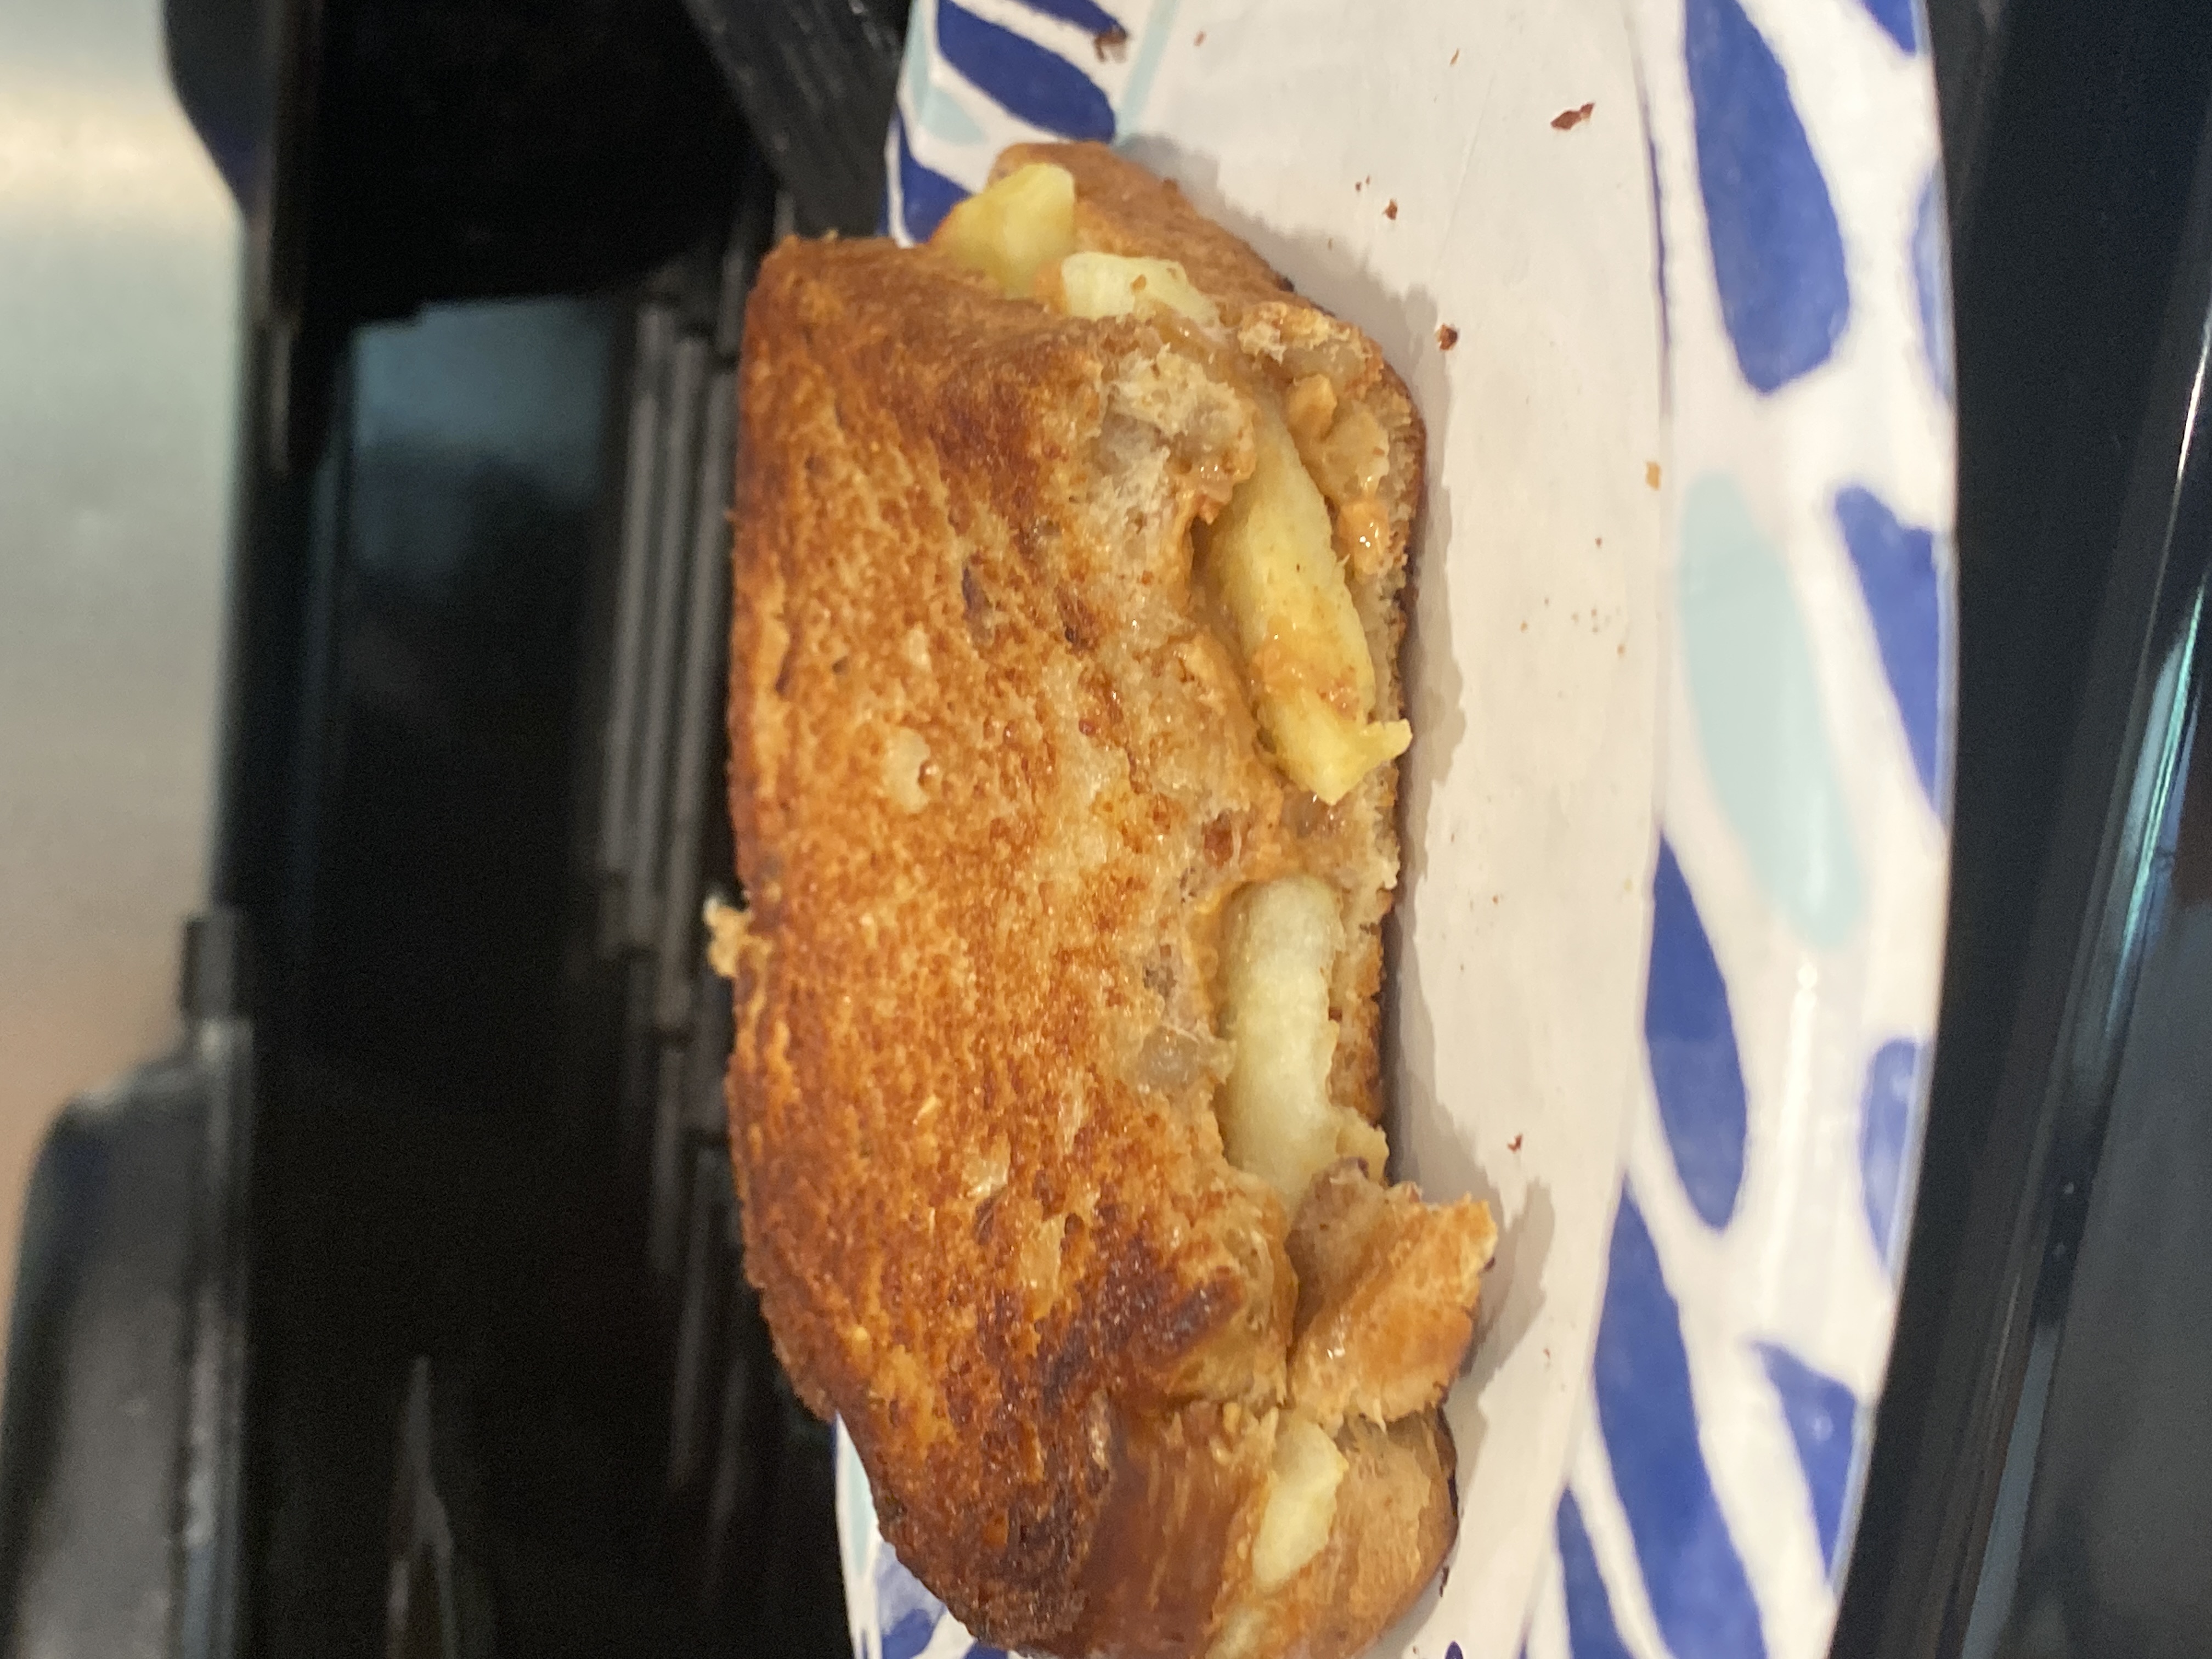 Grilled Peanut Butter Apple Sandwiches Allrecipes Member